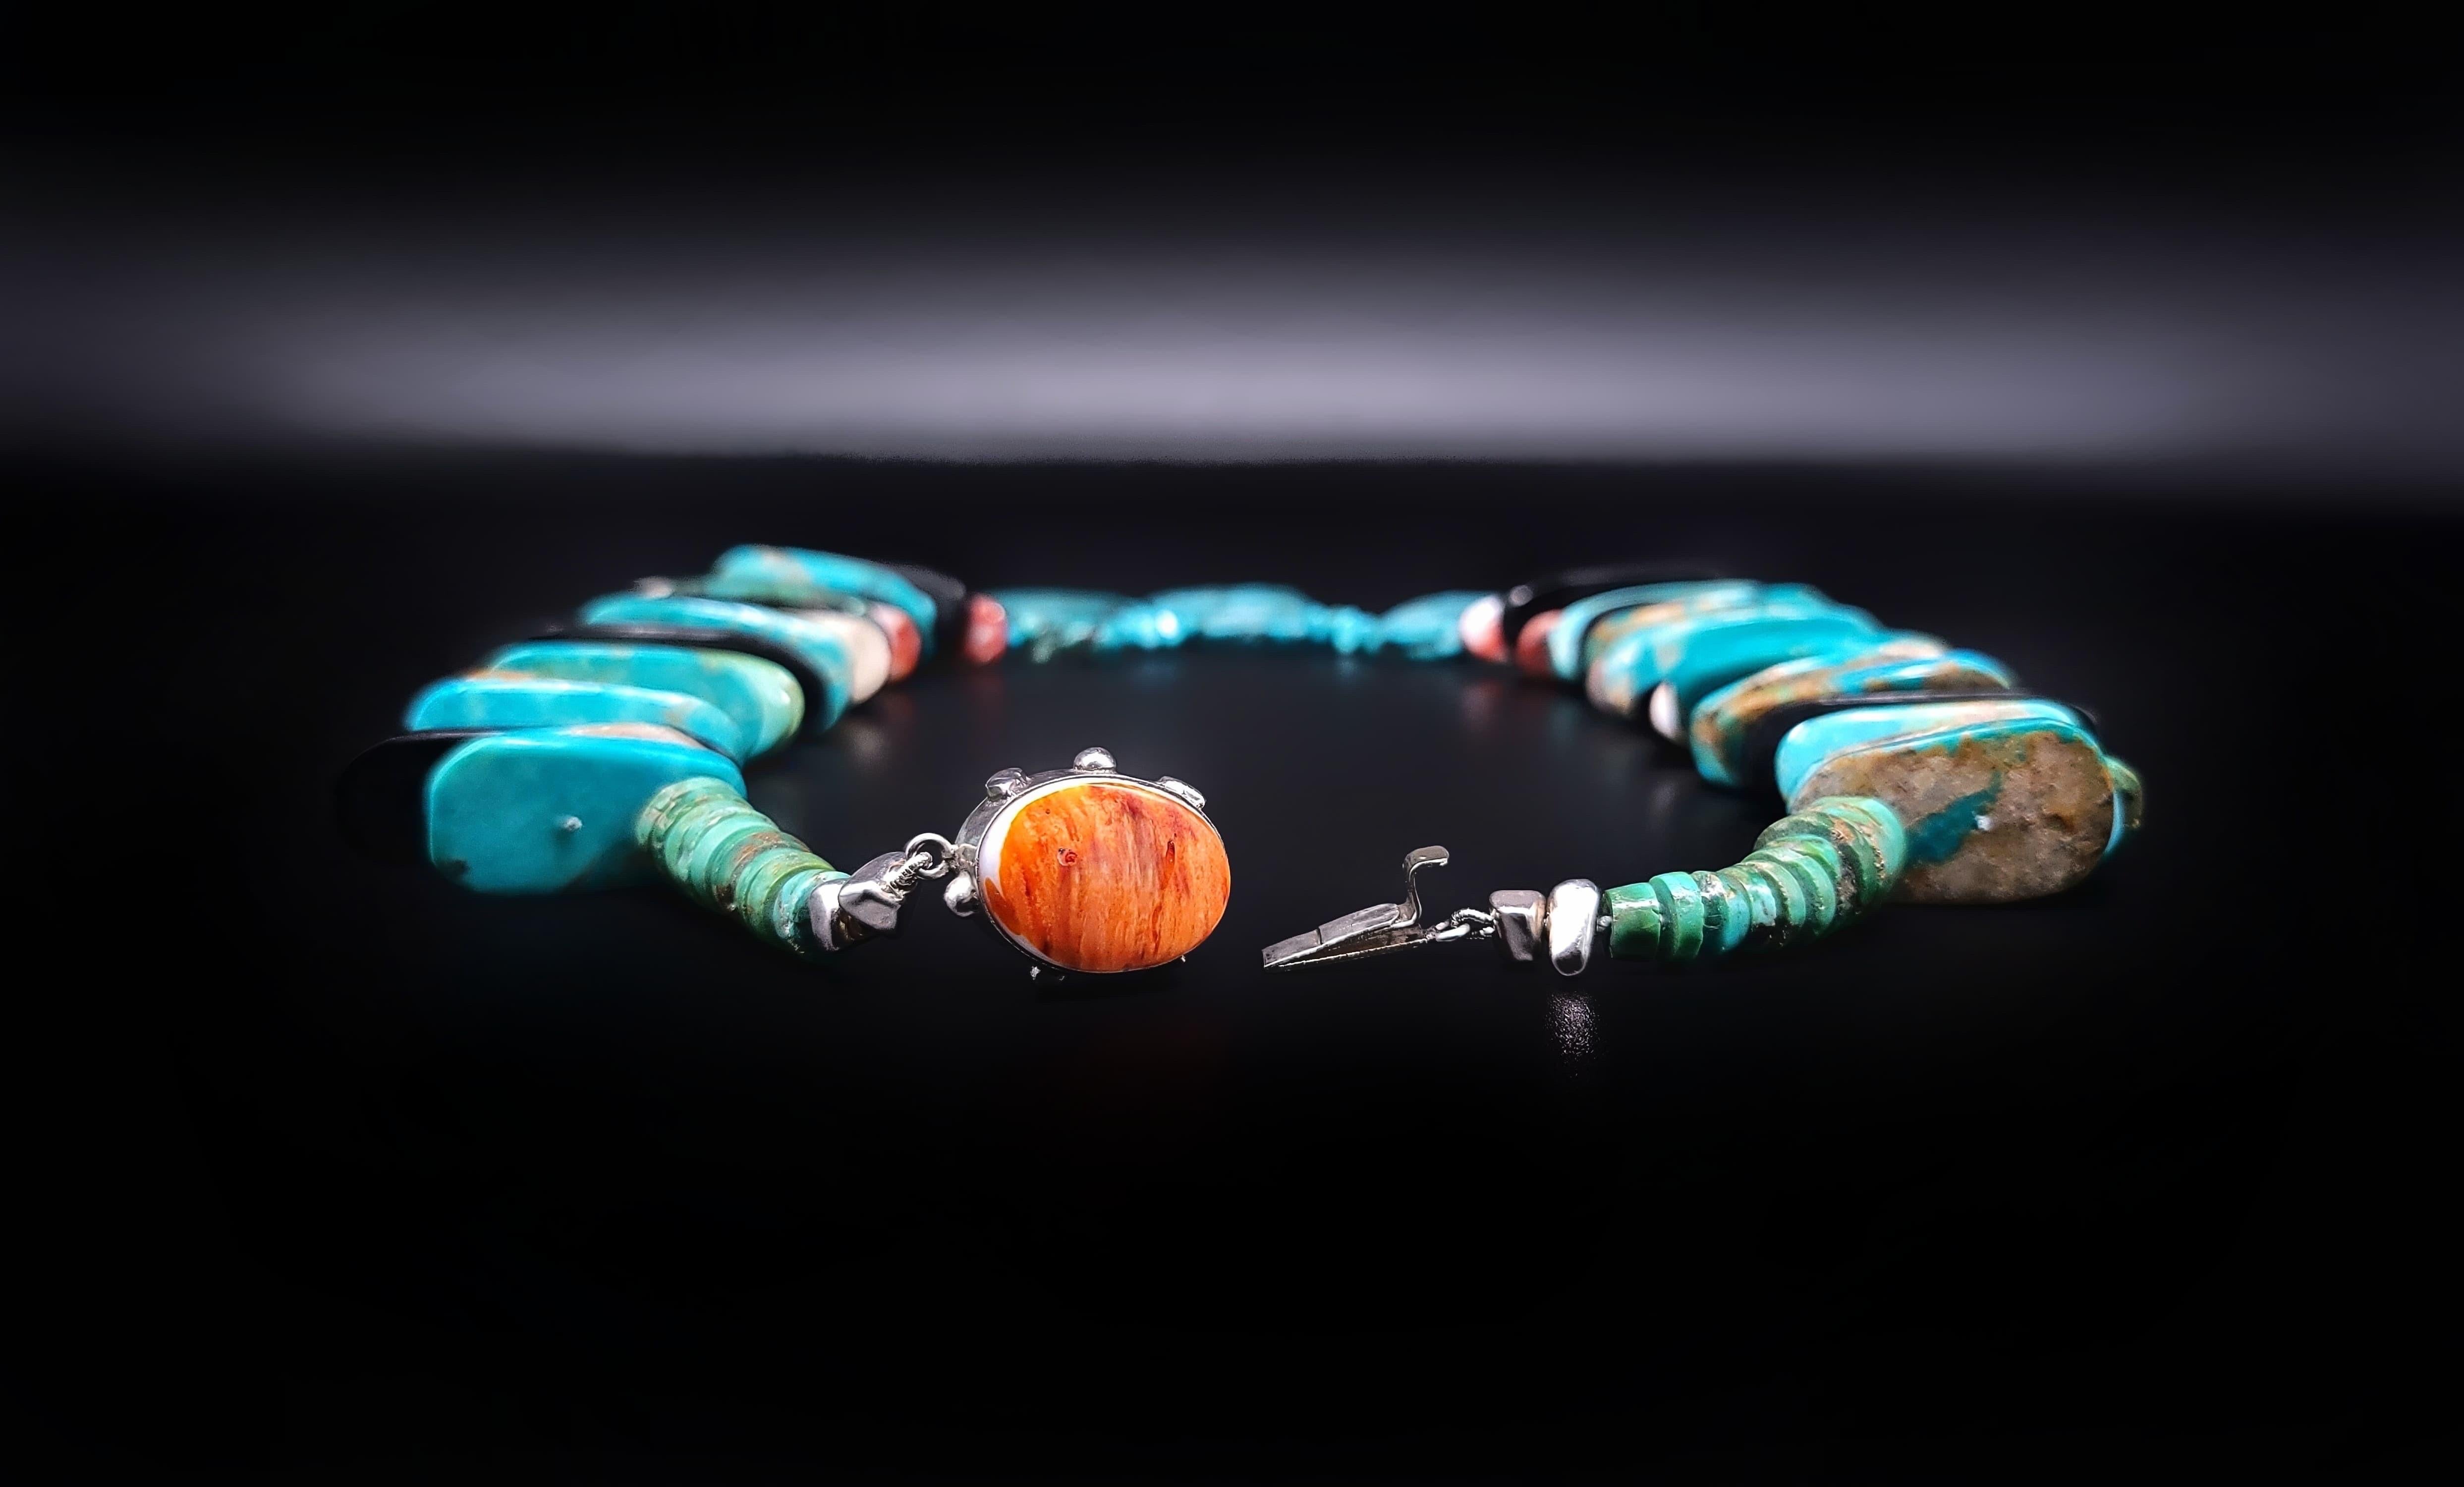 A.Jeschel Massive Showstopping Turquoise Necklace. 2